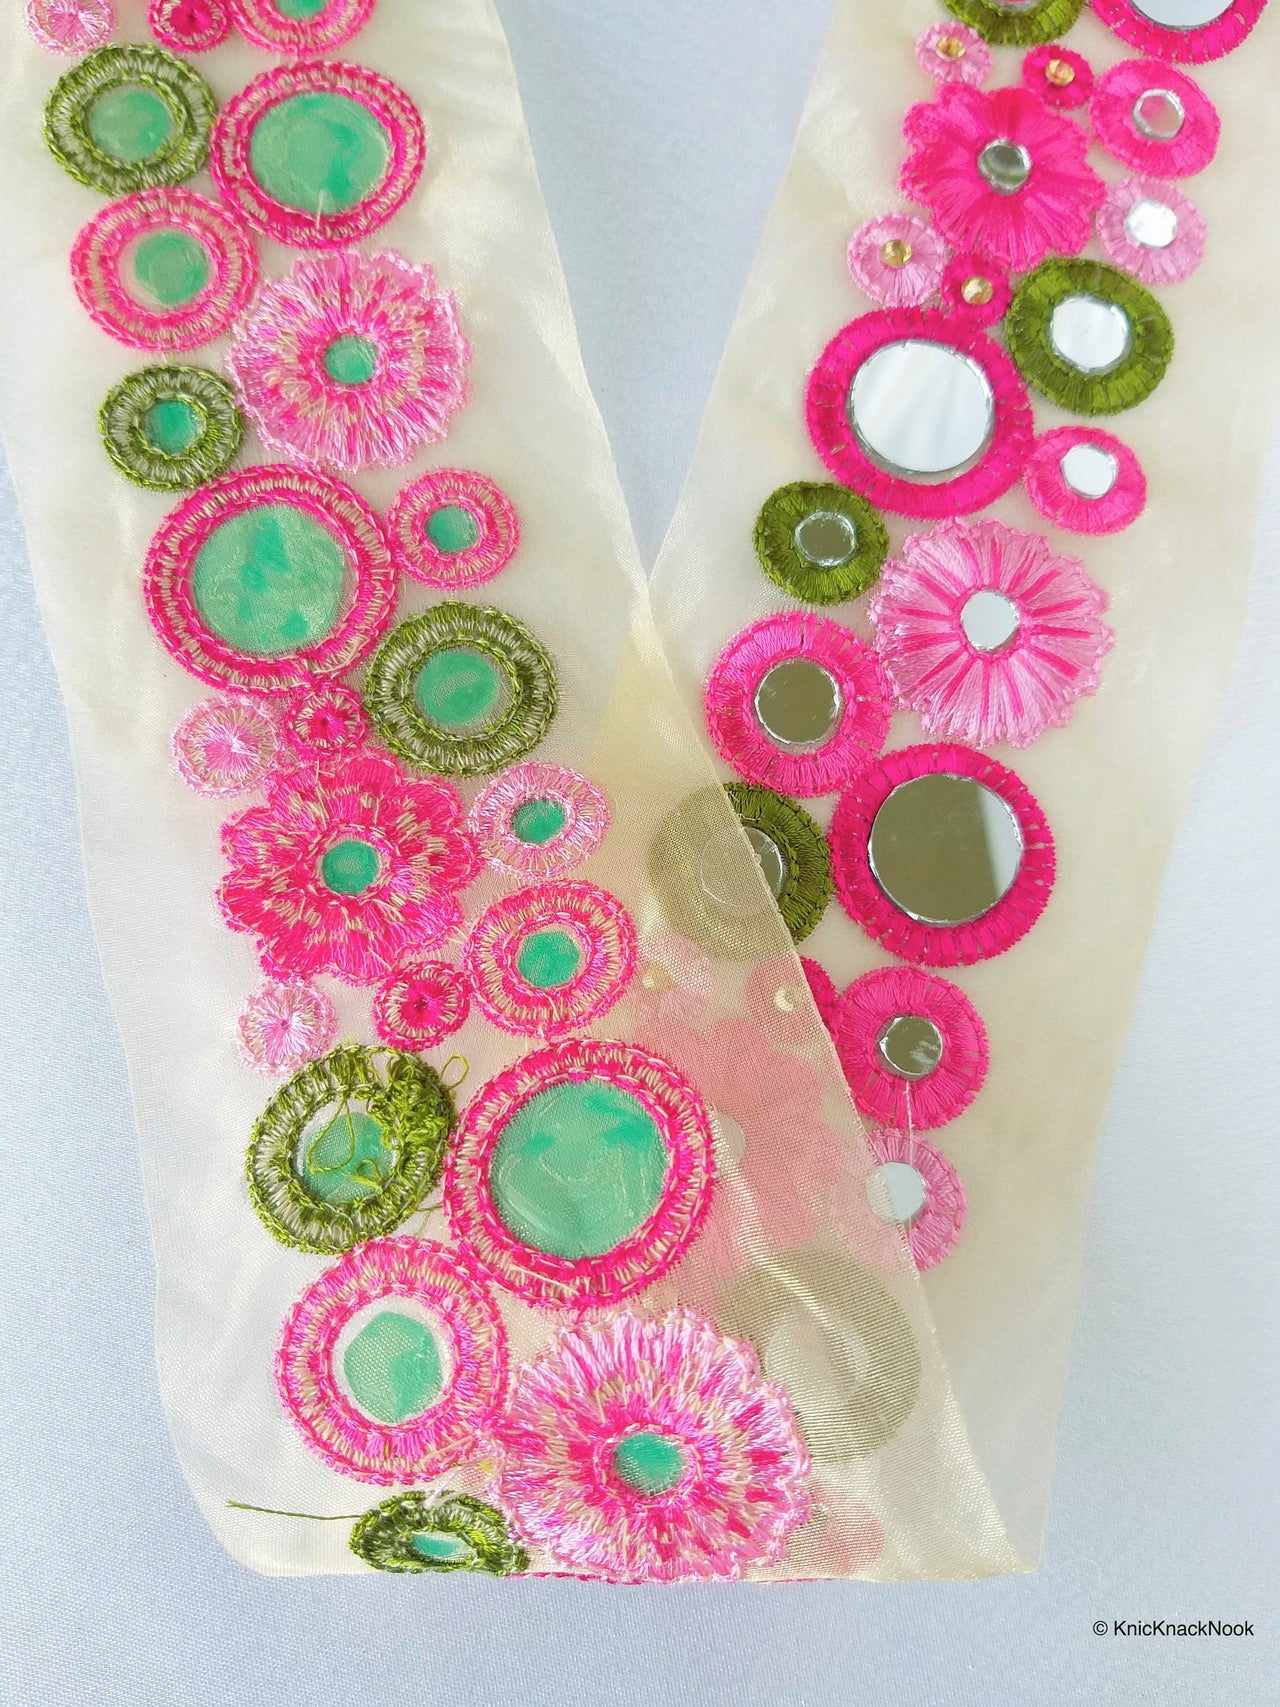 Gold Sheer Tissue Fabric Trim With Red / Pink / Coral And Green Circles and Floral Embroidery With Mirror Embellishments, Approx. 65mm